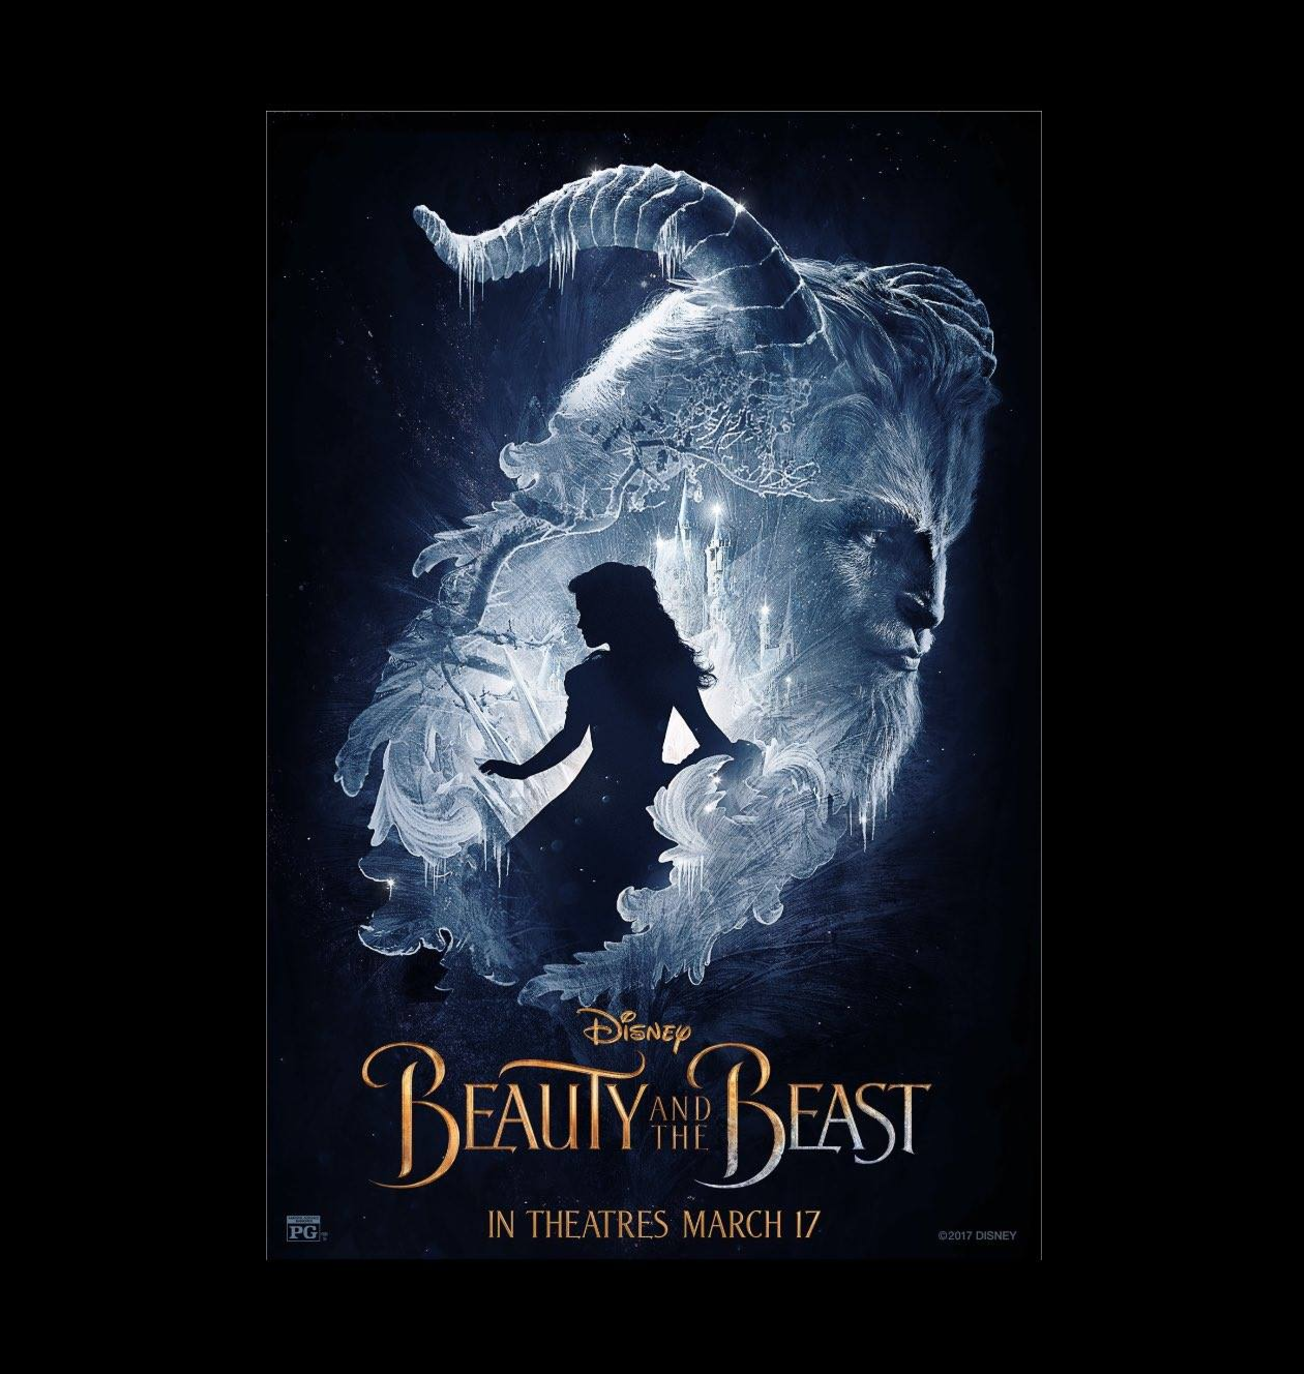 Josh Announces New Song From "Beauty and the Beast" & Reveals Poster